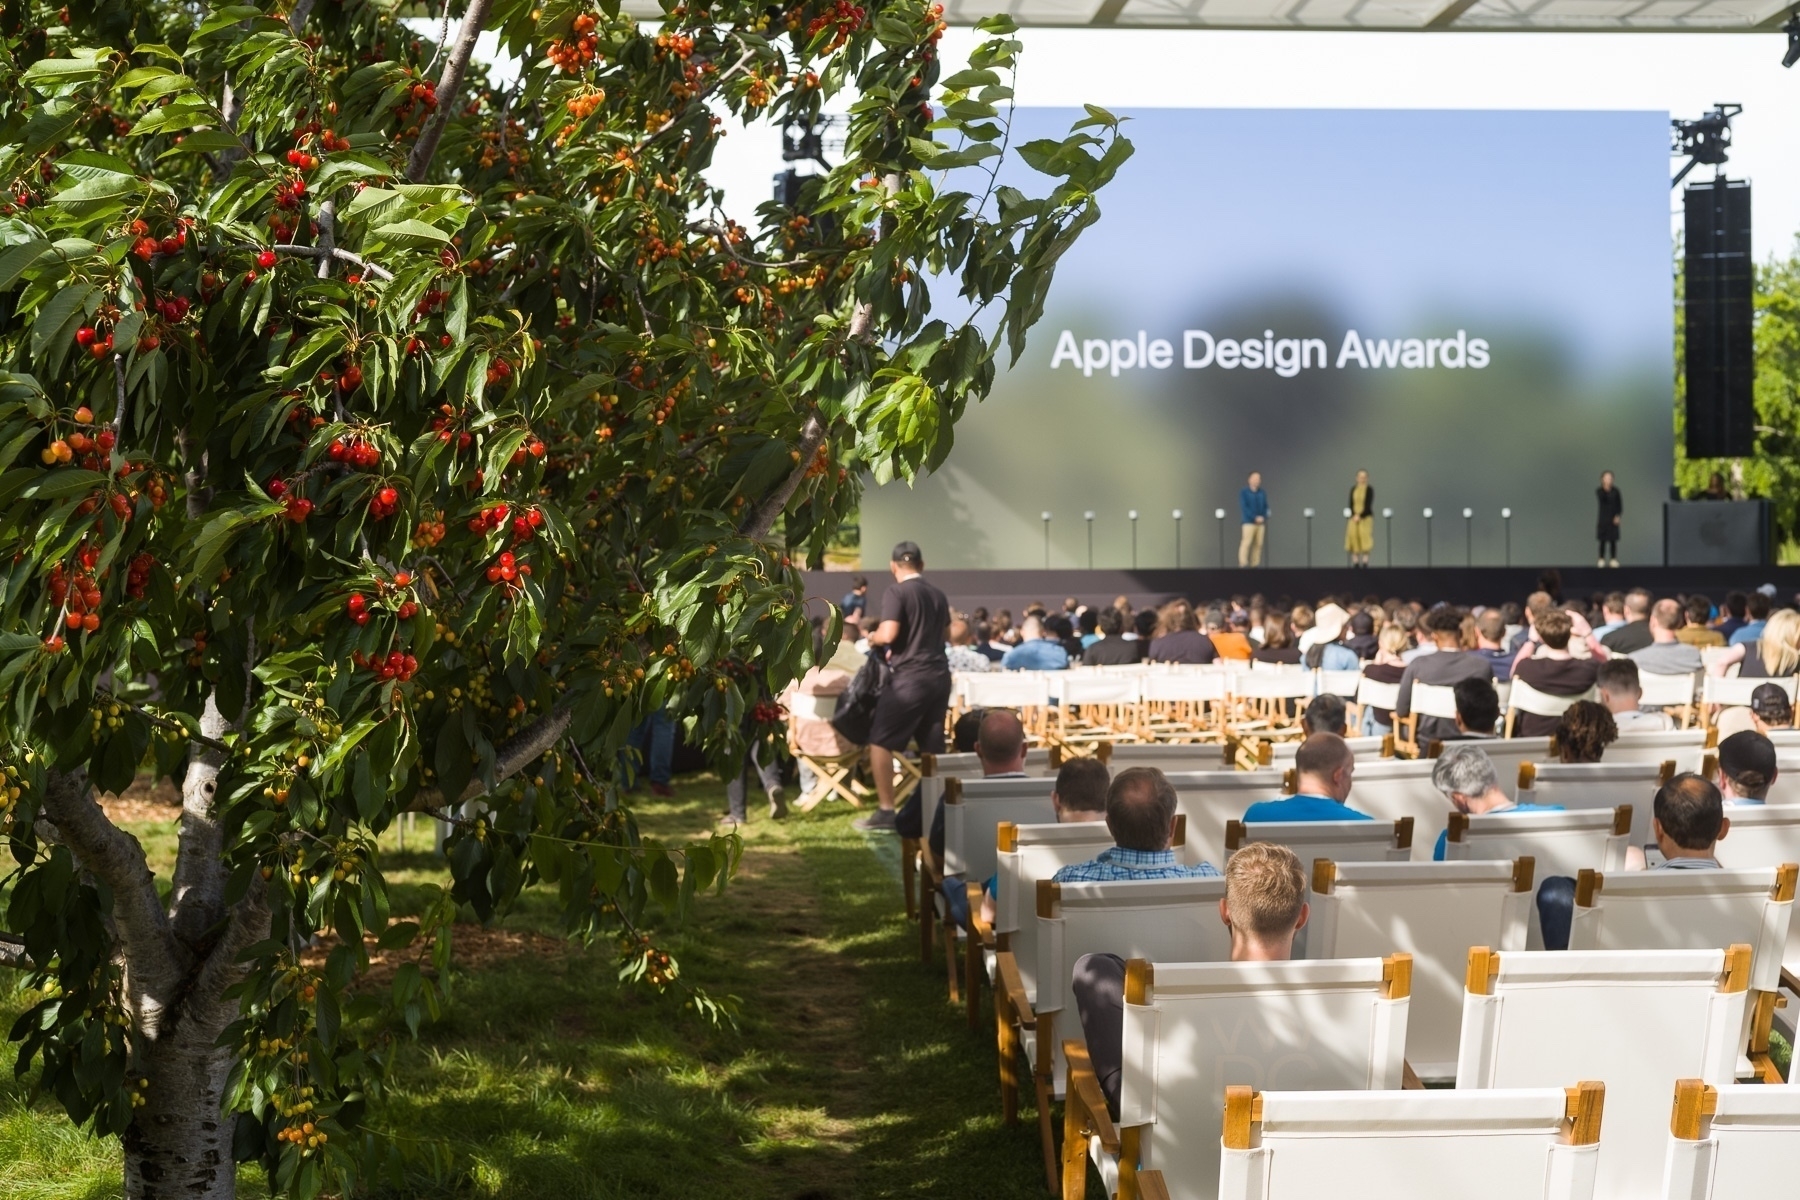 On the left is a cherry tree with ripe cherries. On the right are some chairs with people sitting on them as seen from behind. In the distance is a stage with three people and a screen that says “Apple Design Awards”.